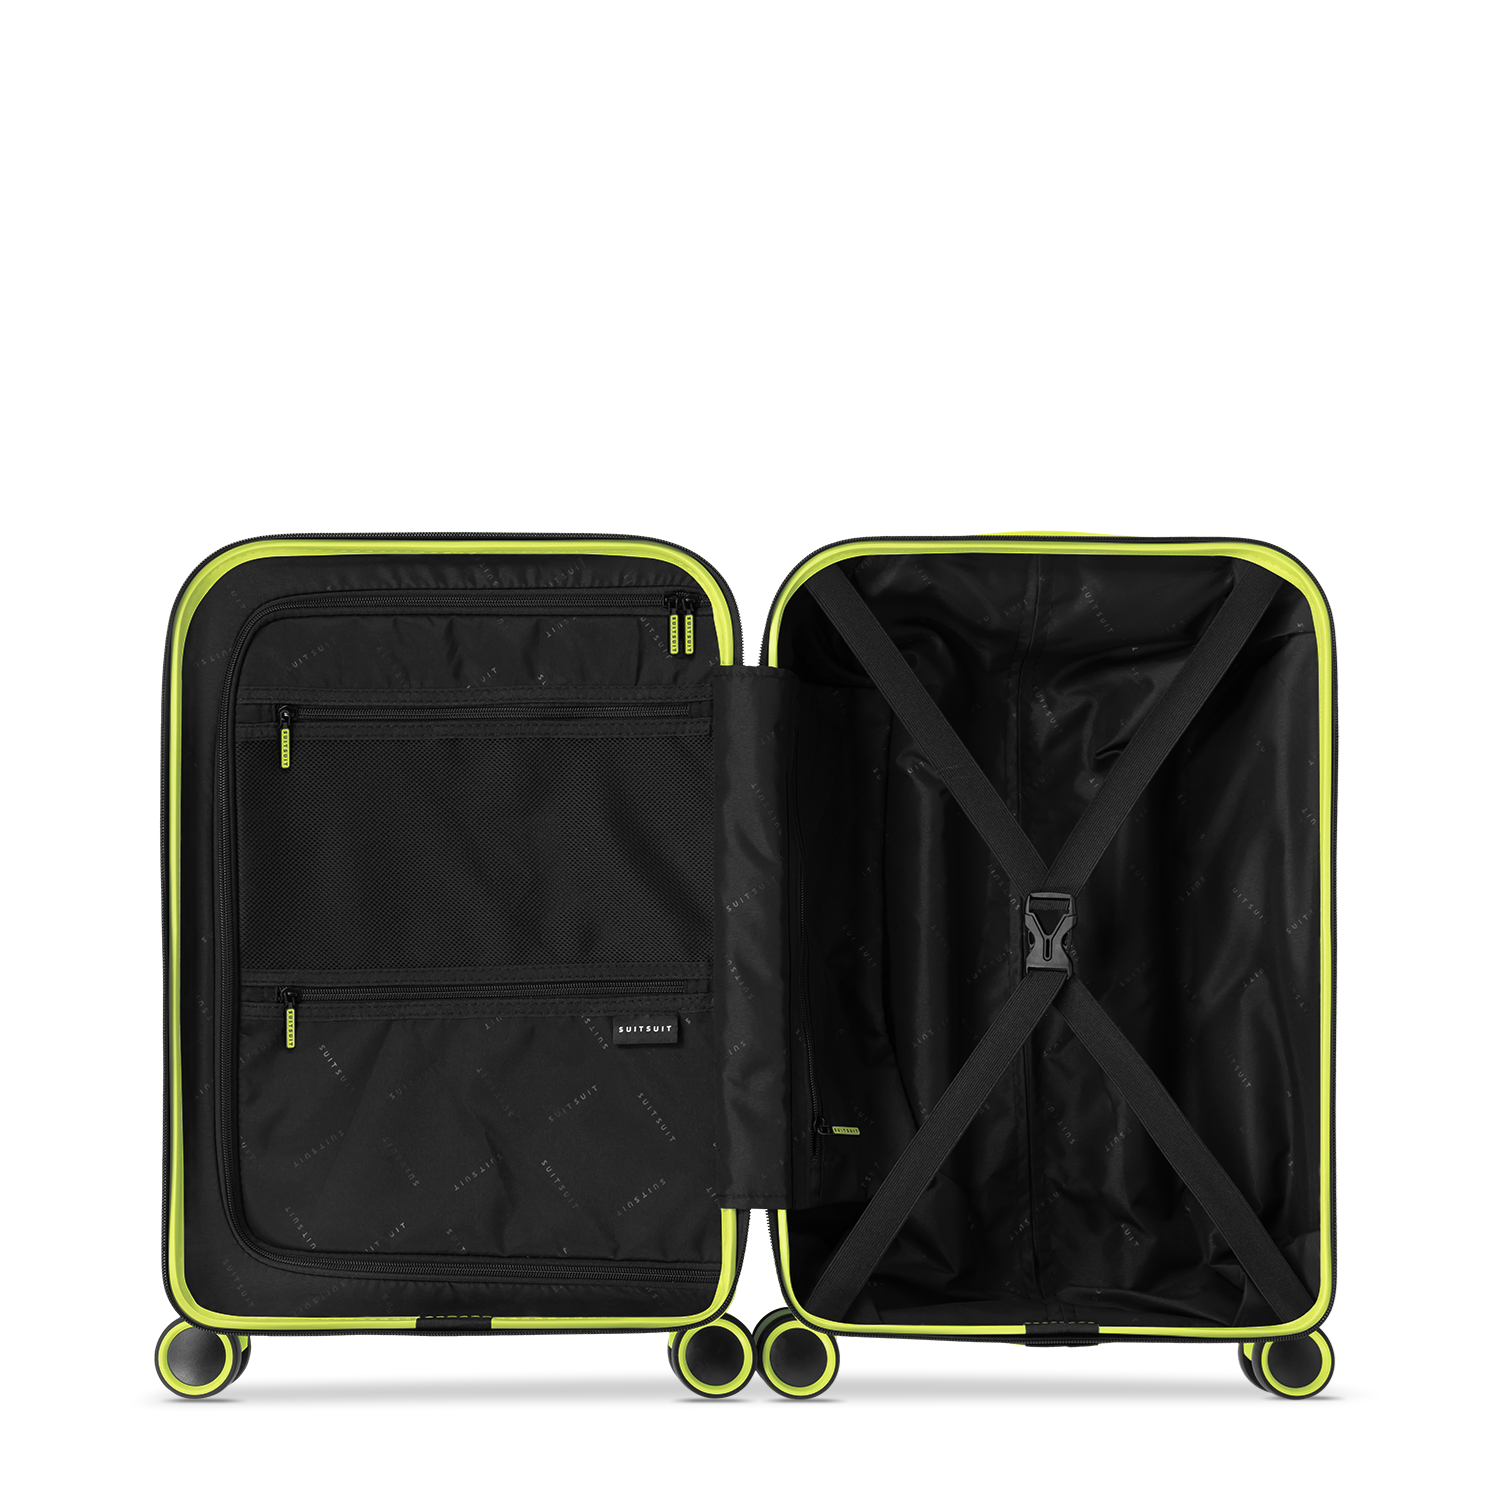 Expression - Cyber Lime - Carry-on (20 inch)